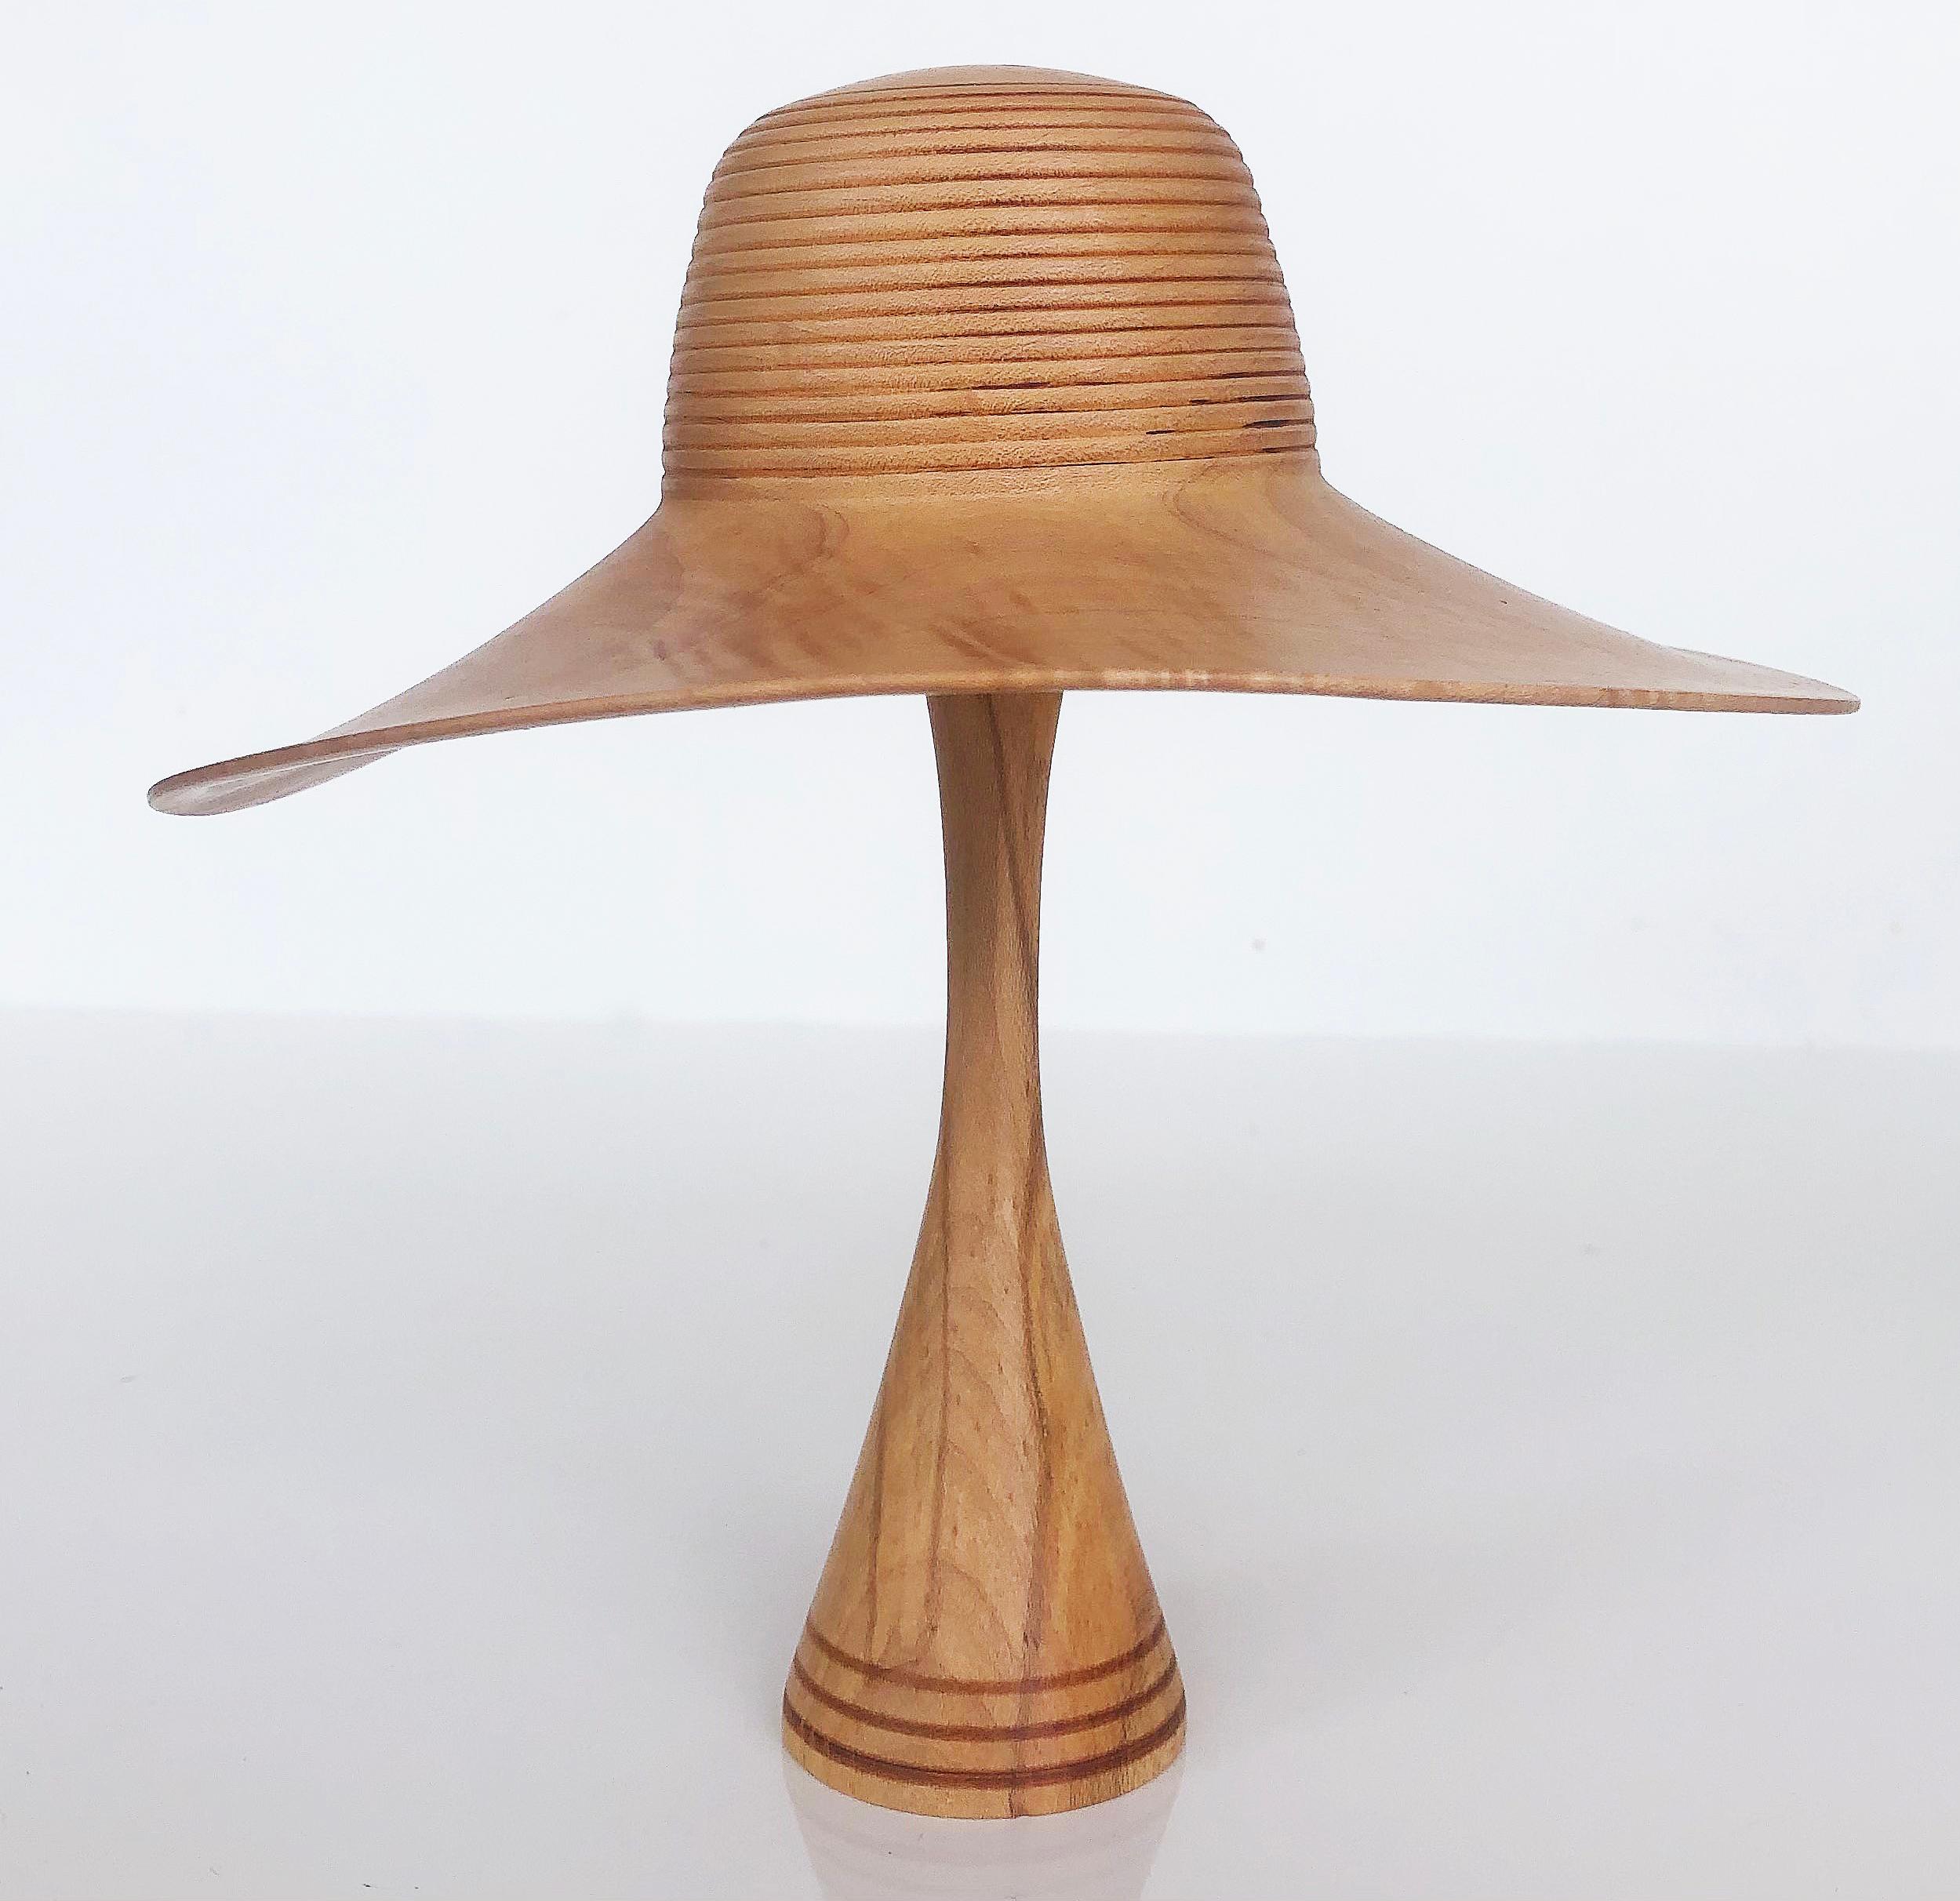  Johannes Michelsen Turned Pair of Wood Hats on Stands, Signed and Dated 4